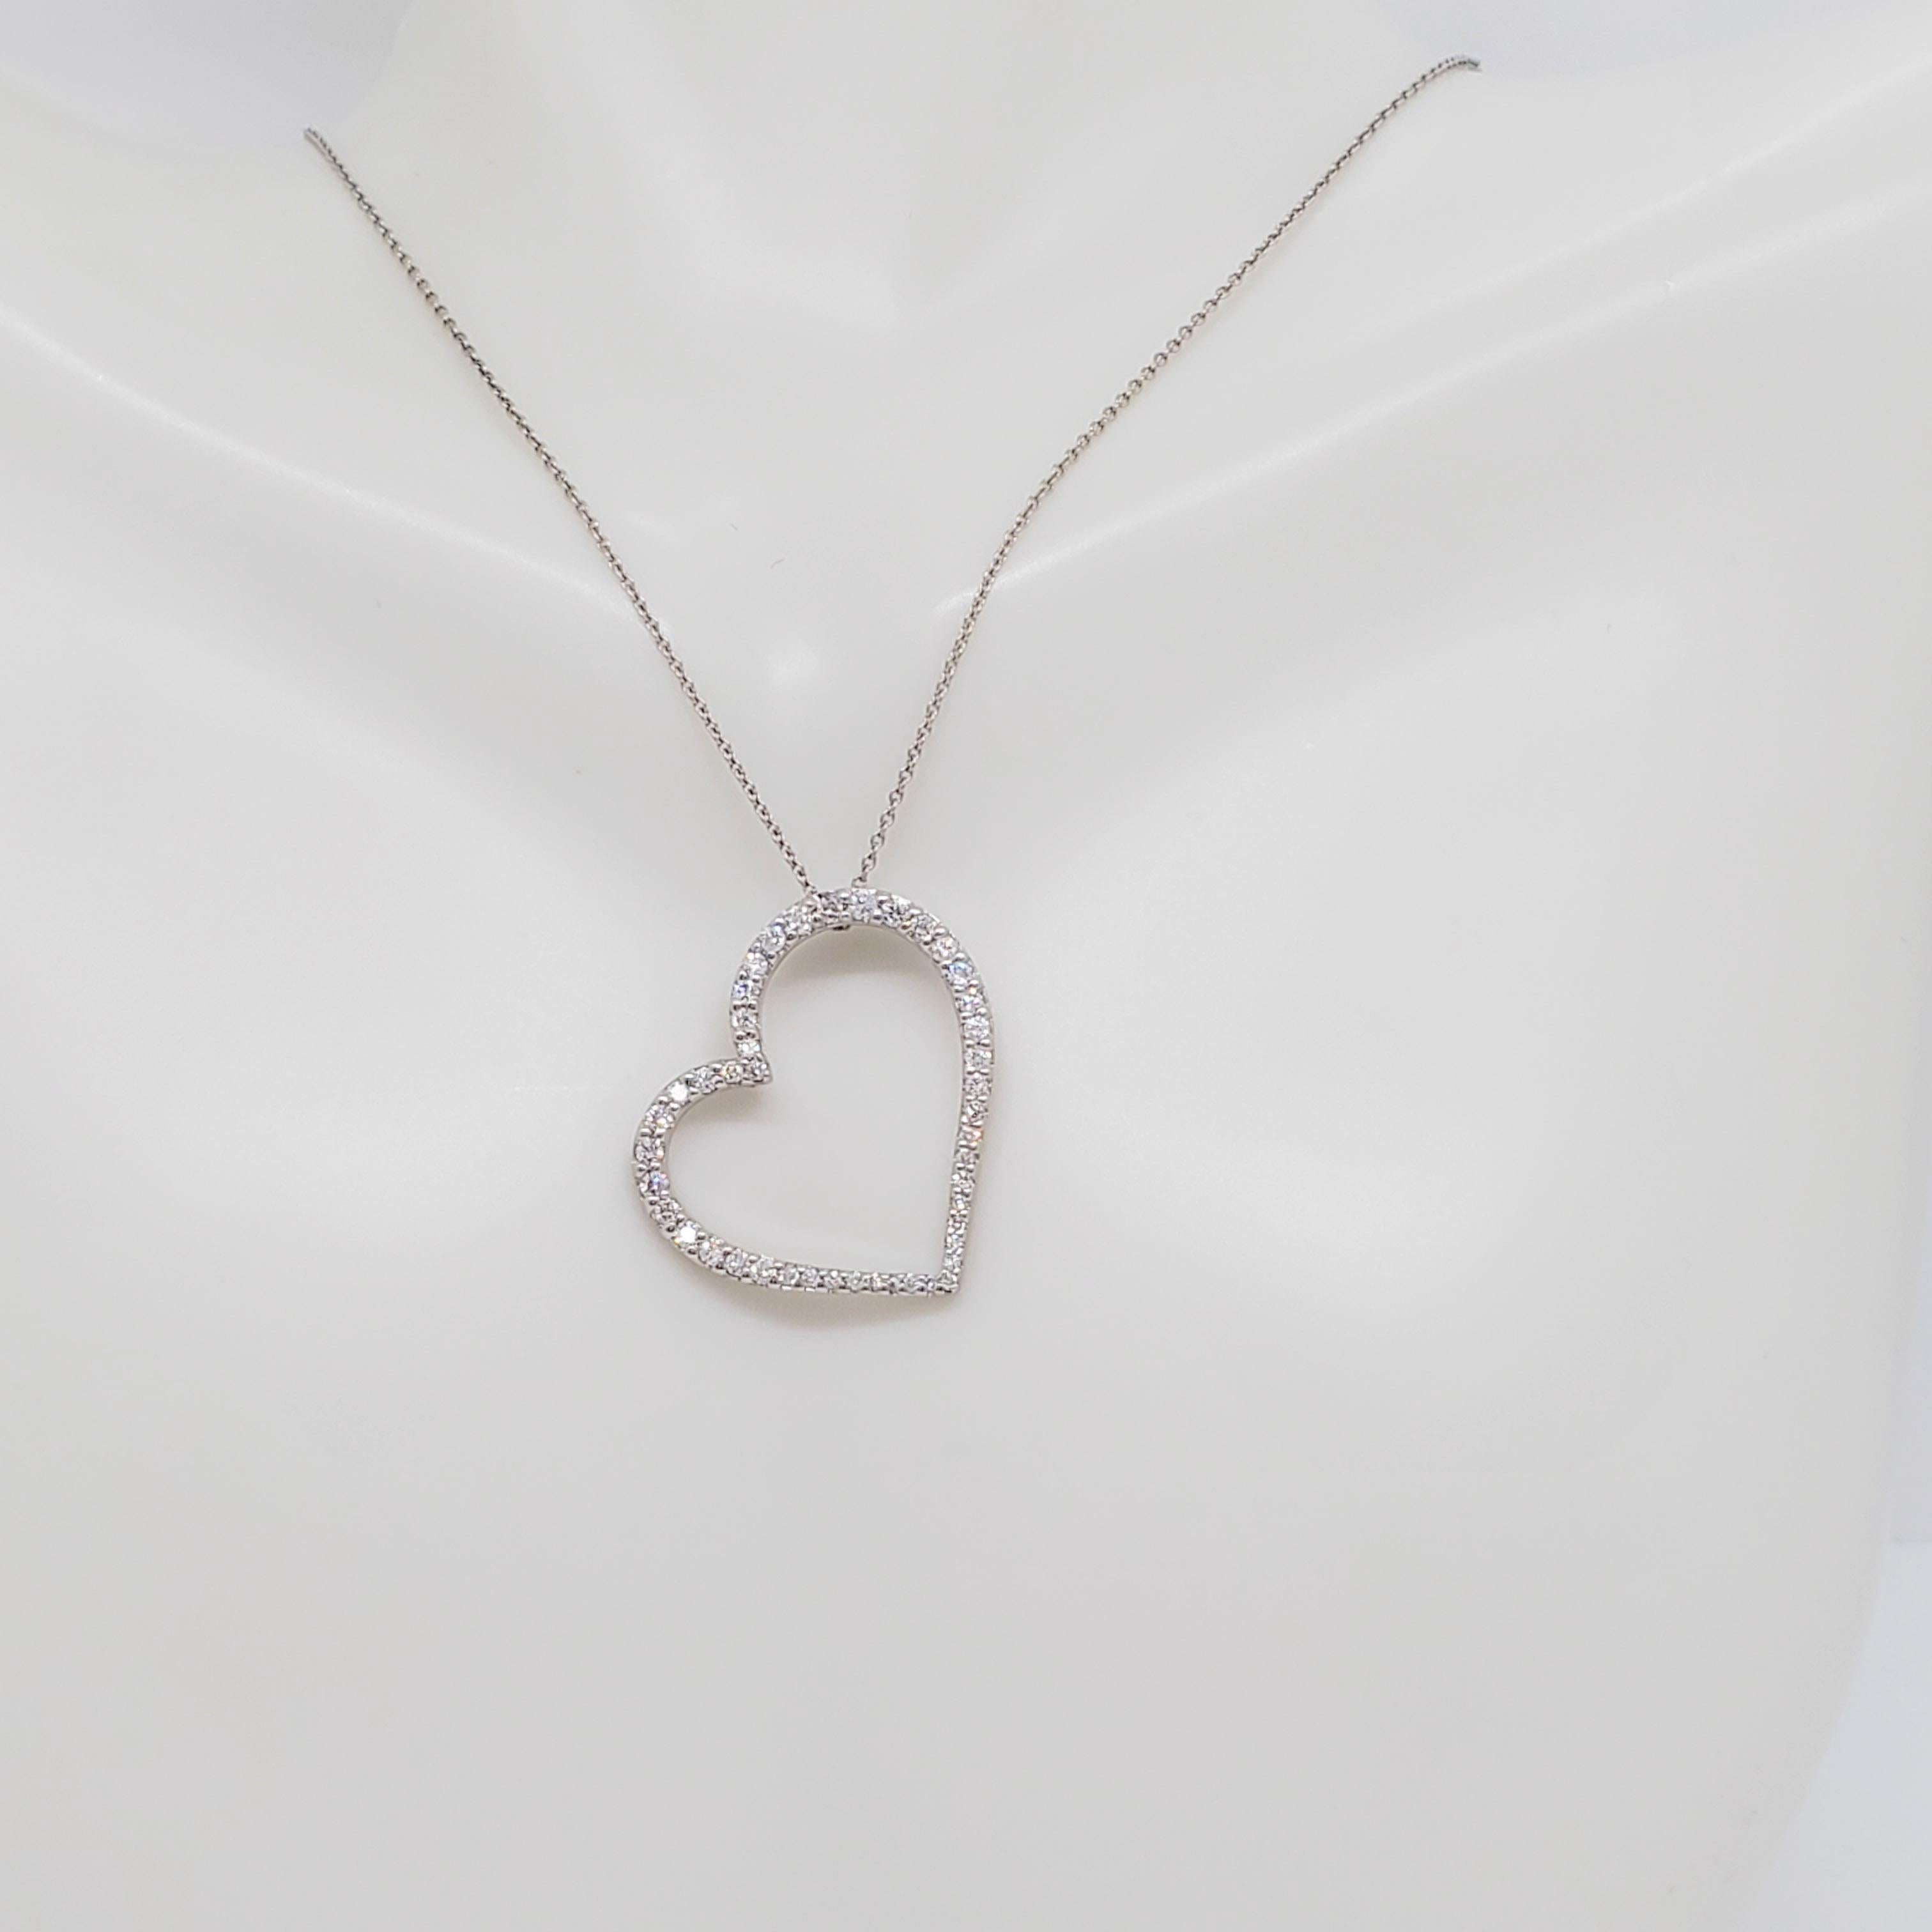 Beautiful Roberto Coin slanted open heart pendant with 0.20 ct. of good quality white diamond rounds.  Handmade in 18k white gold.  Length is 18